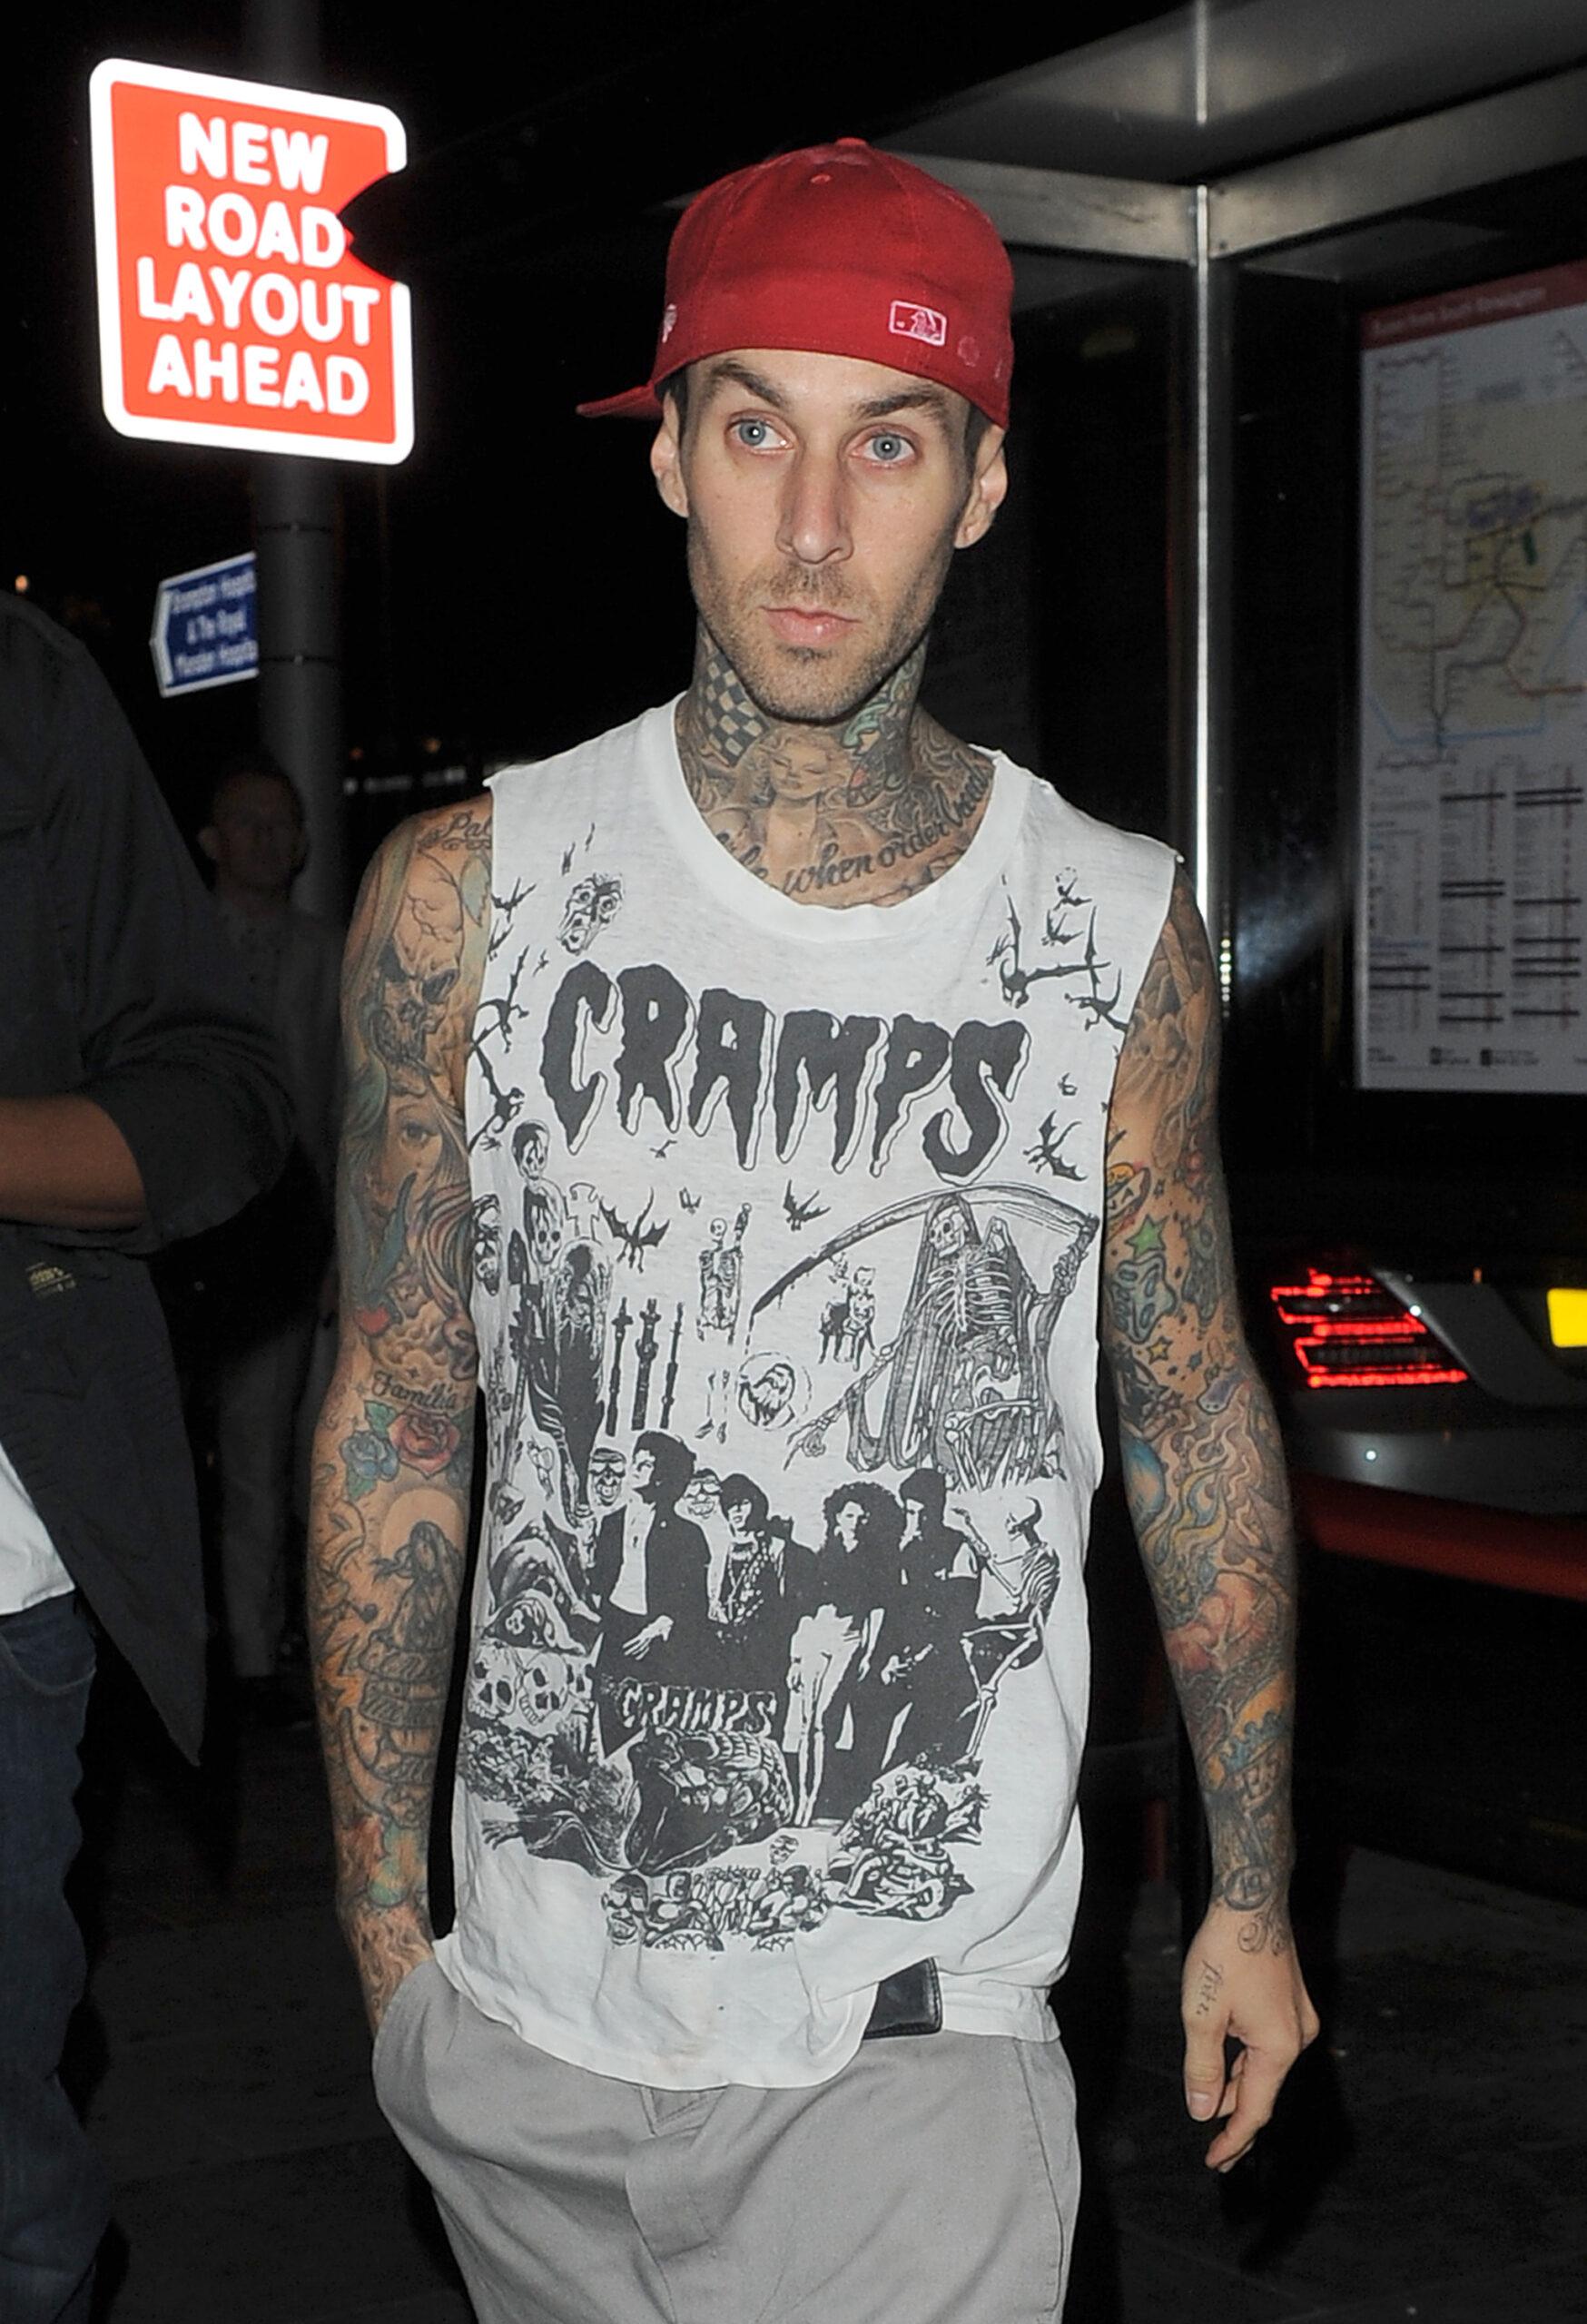 Travis Barker of Blink-182 arriving at Boujis nightclub in Kensington He wore a Cramps vest baggy grey shorts and a red baseball cap